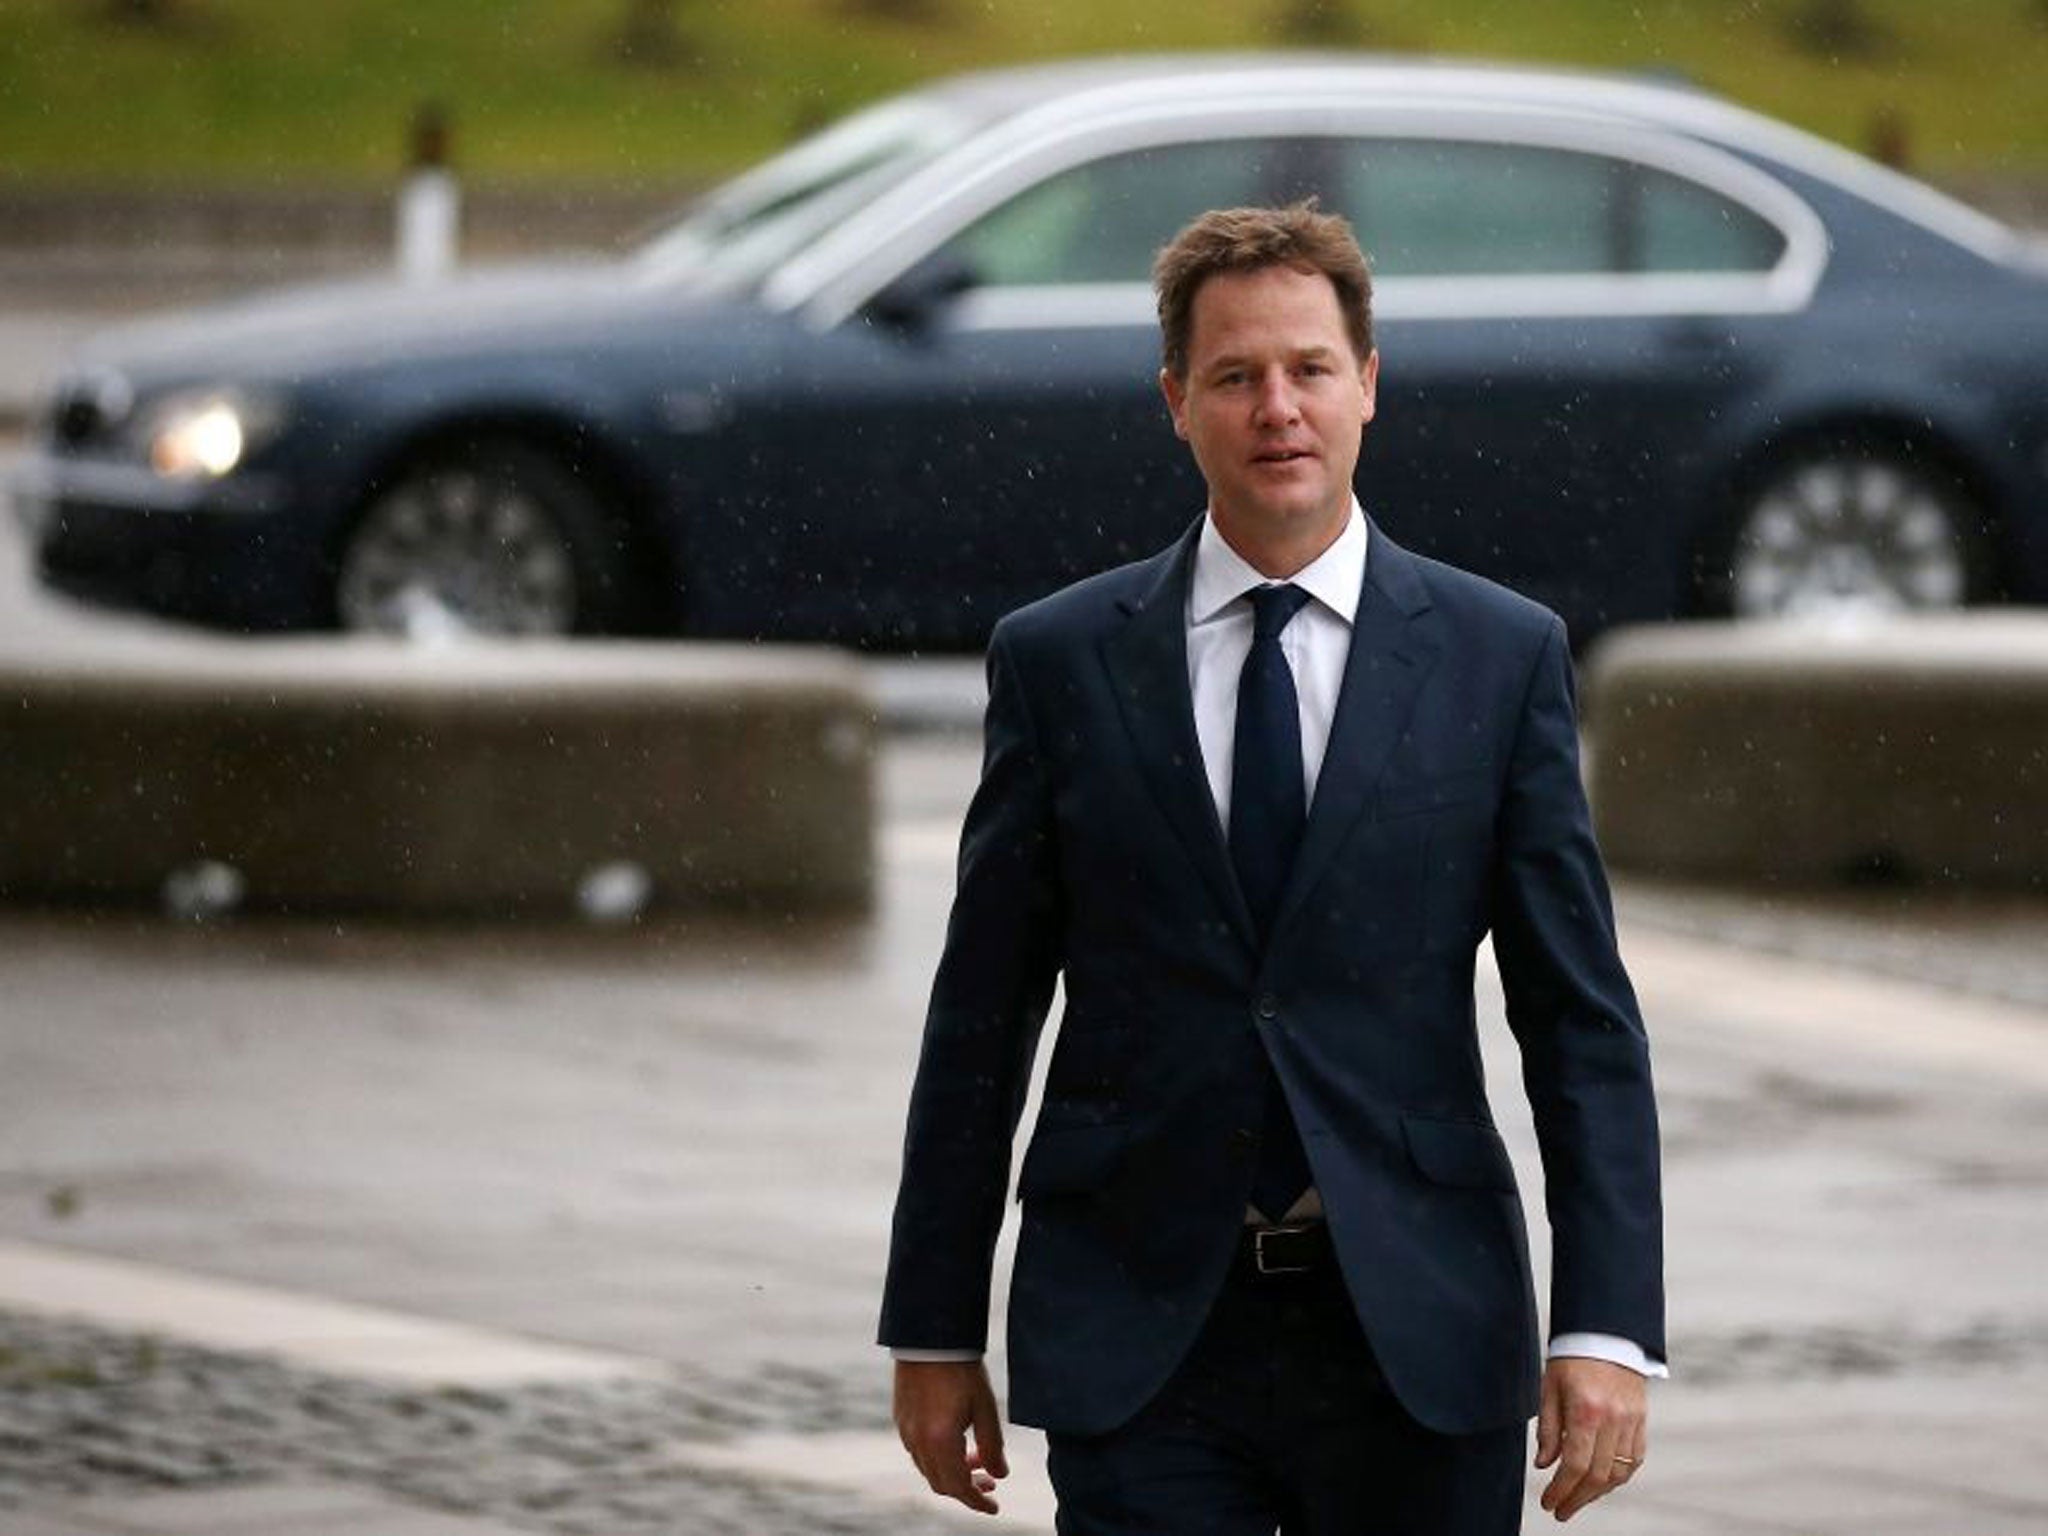 In the ledger of tiny gains and losses by which party morale is measured, it is a point for Clegg